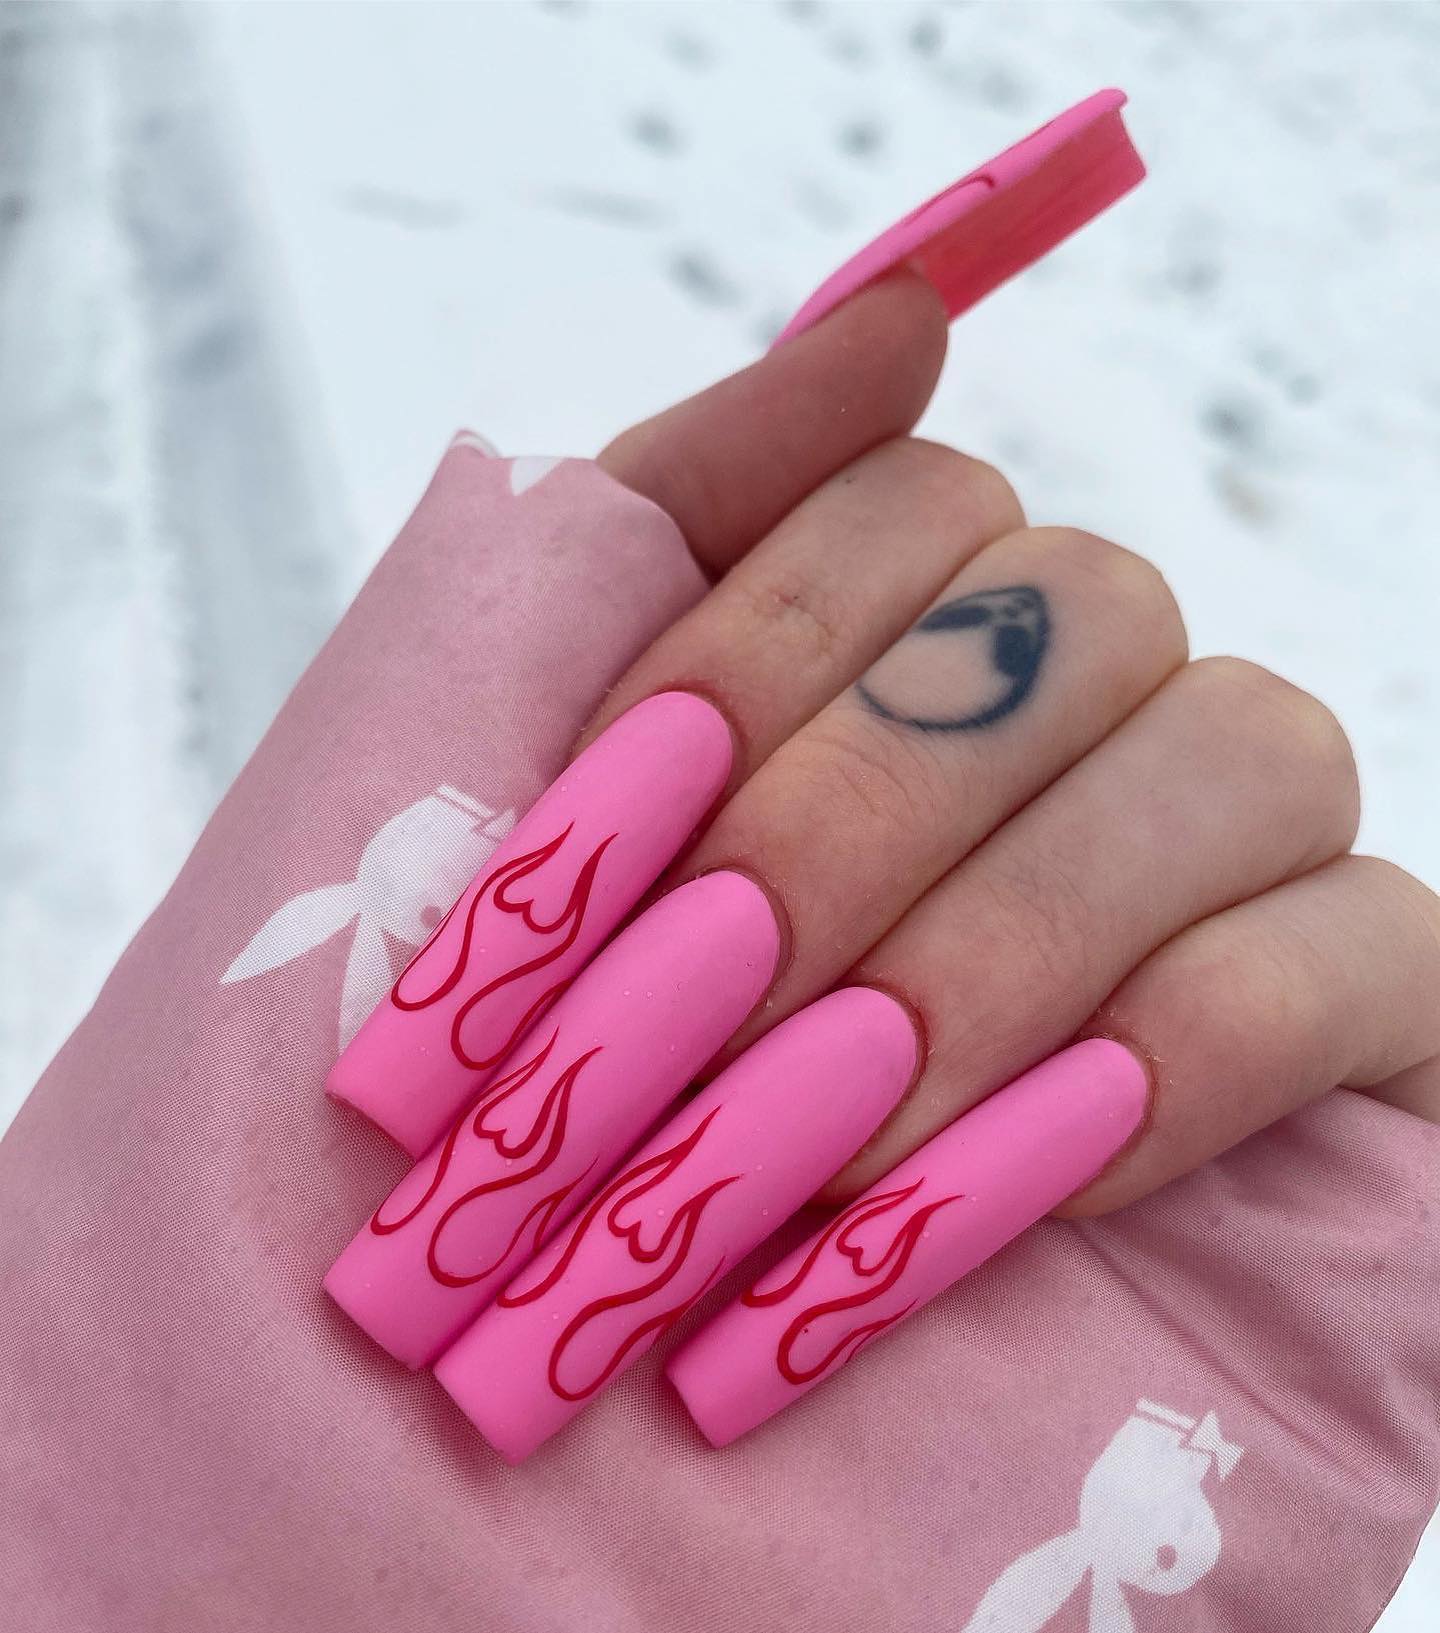 All shades of pink is amazing but baby pink definitely takes a greater look with matte nail polish. Also, it is known that pink and red go together very well, so you need to get your flame nail art red to rock.